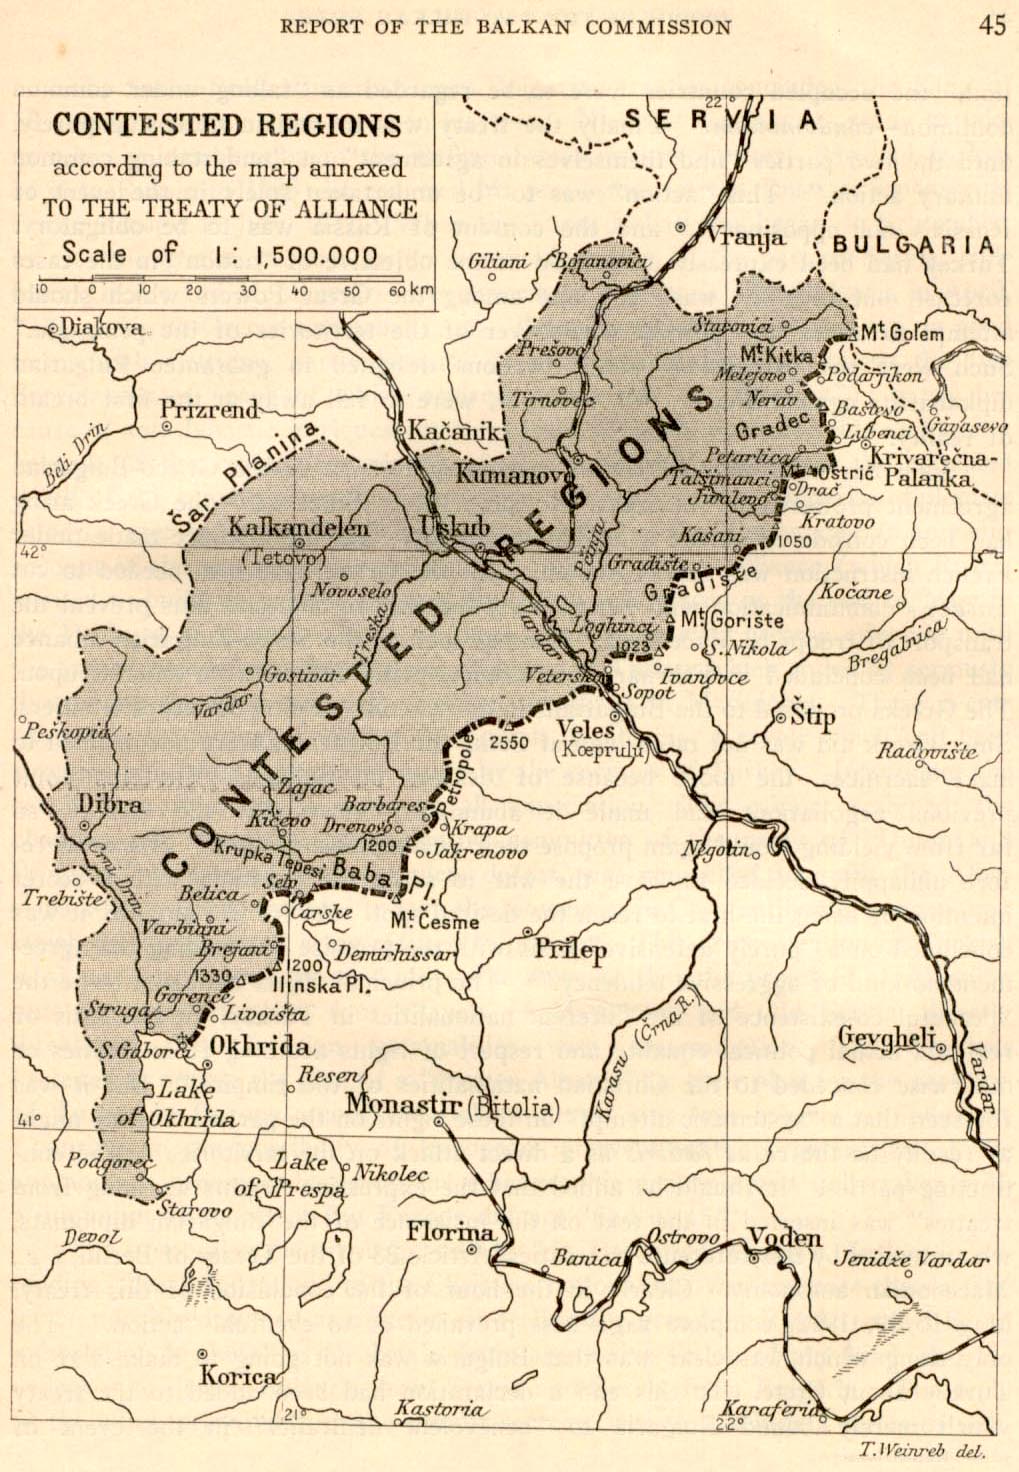 Map of the Balkan 1912 - Treaty of Alliance, March 13, 1912